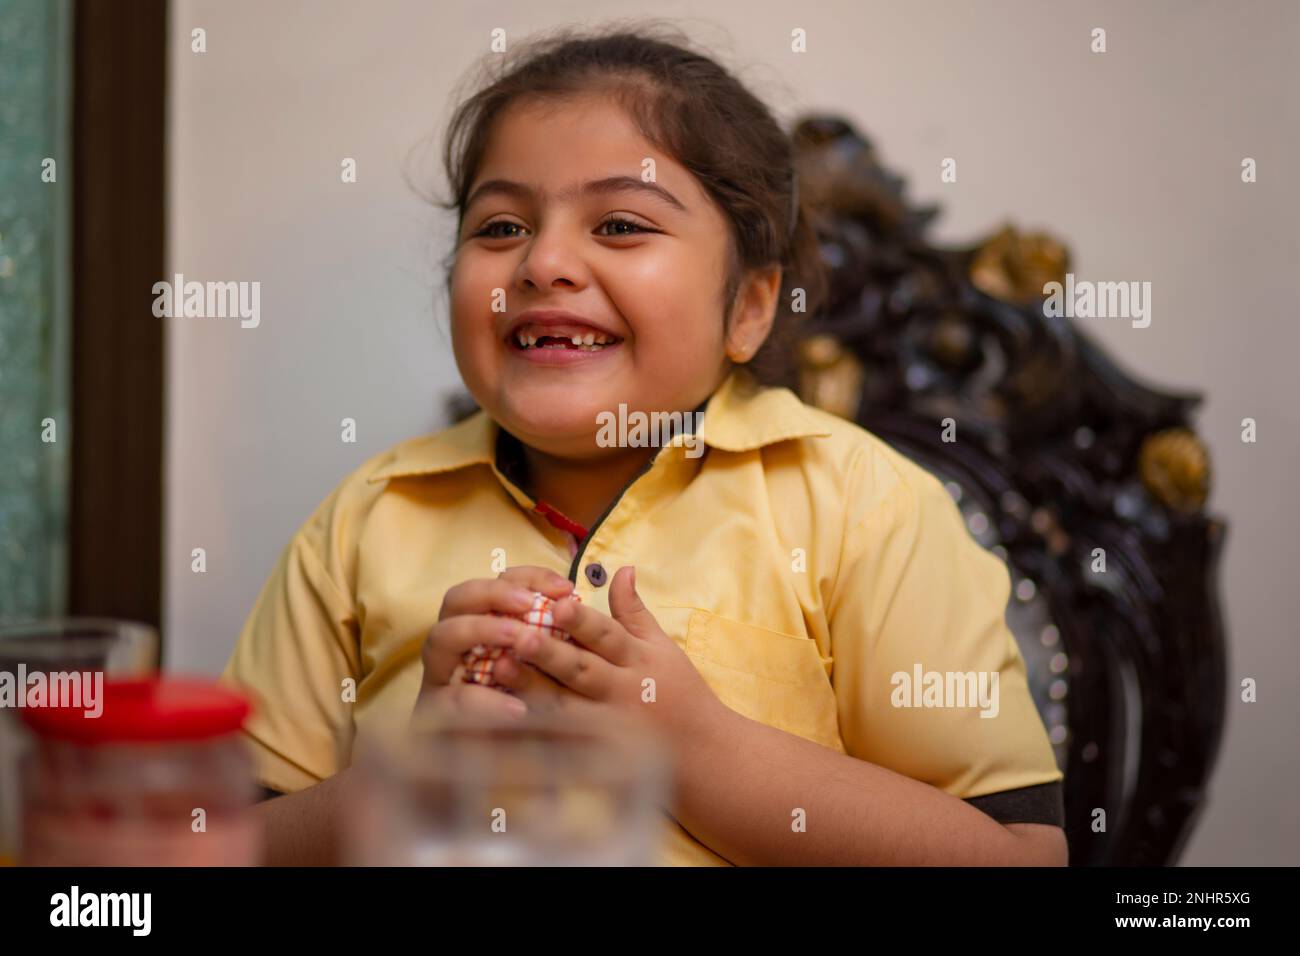 Close-up portrait of cheerful little girl while having breakfast at home Stock Photo